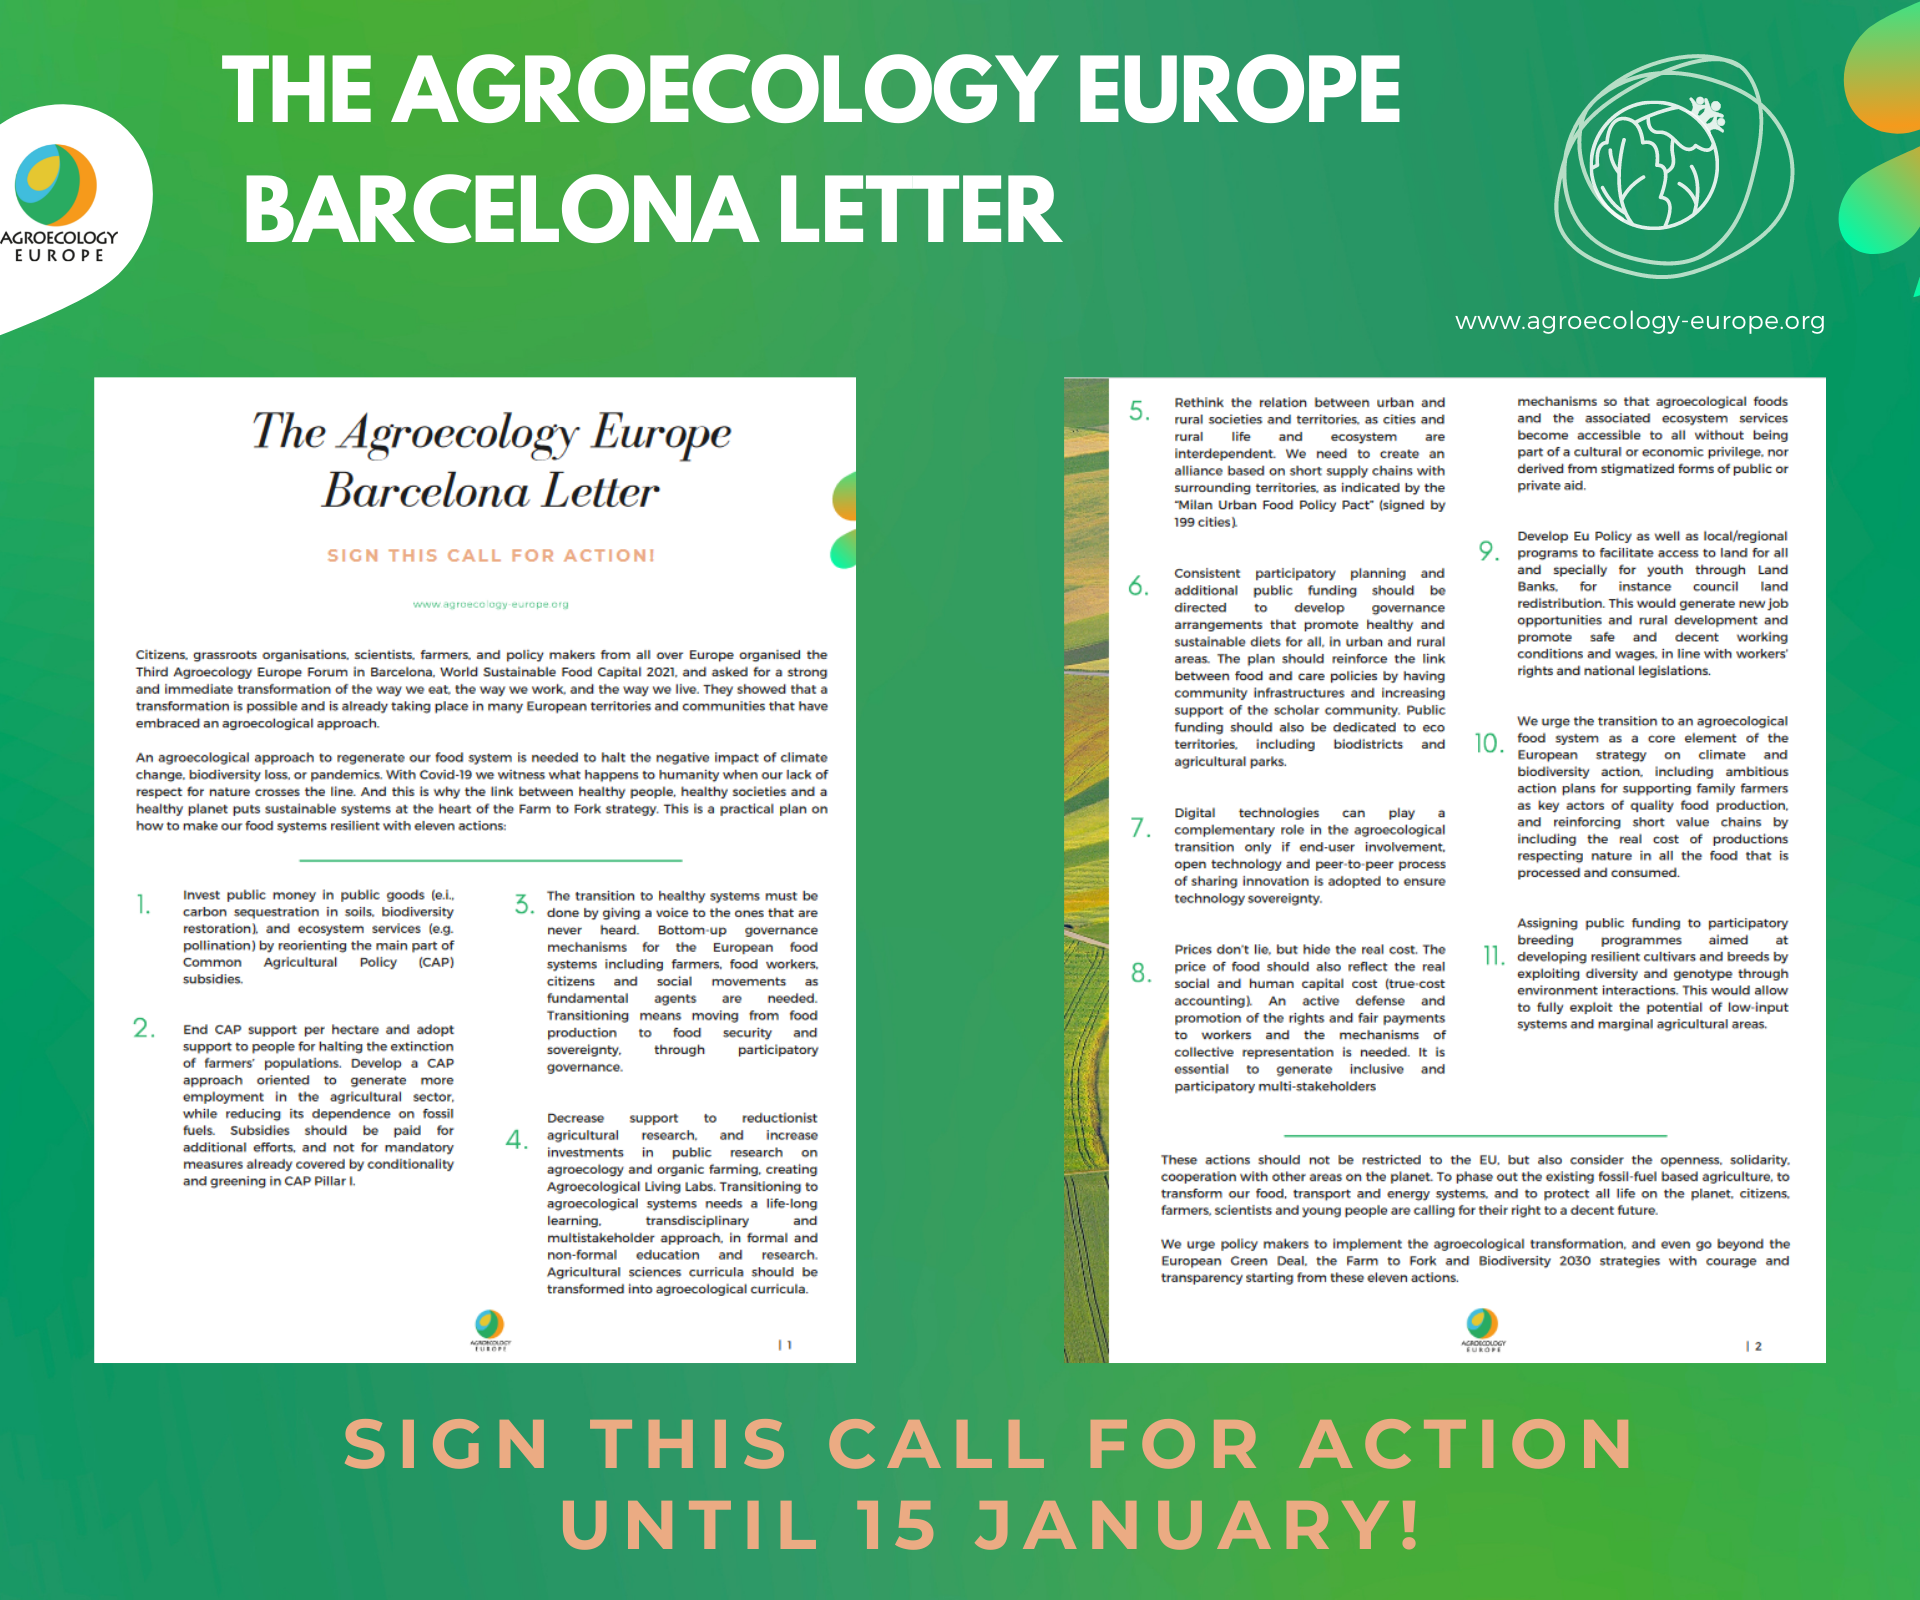 Read and sign the Agroecology Europe Barcelona Letter